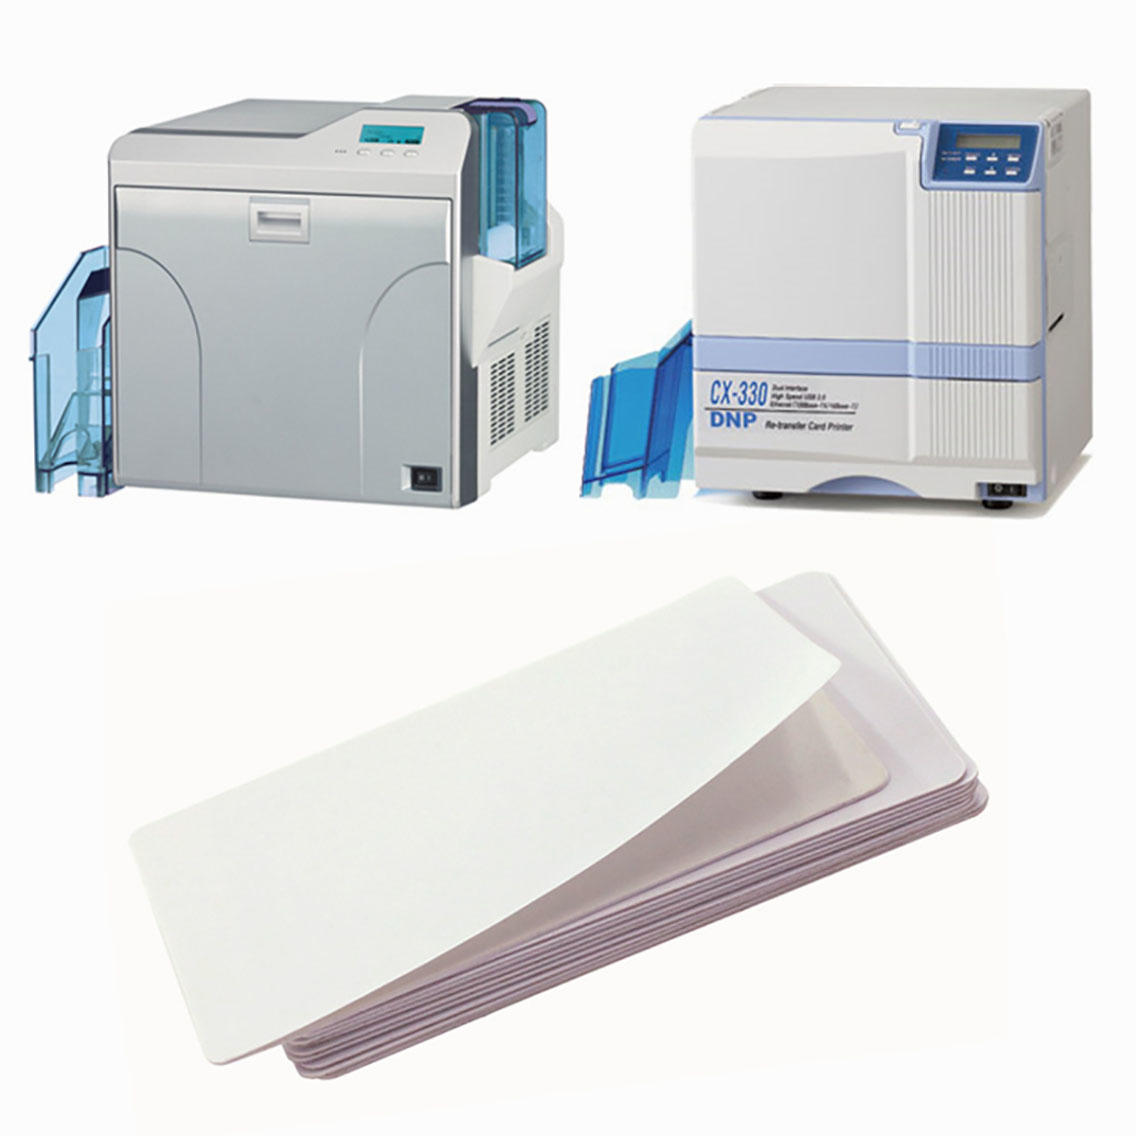 Cleanmo PVC inkjet cleaning kit supplier for DNP CX-210, CX-320 & CX-330 Printers